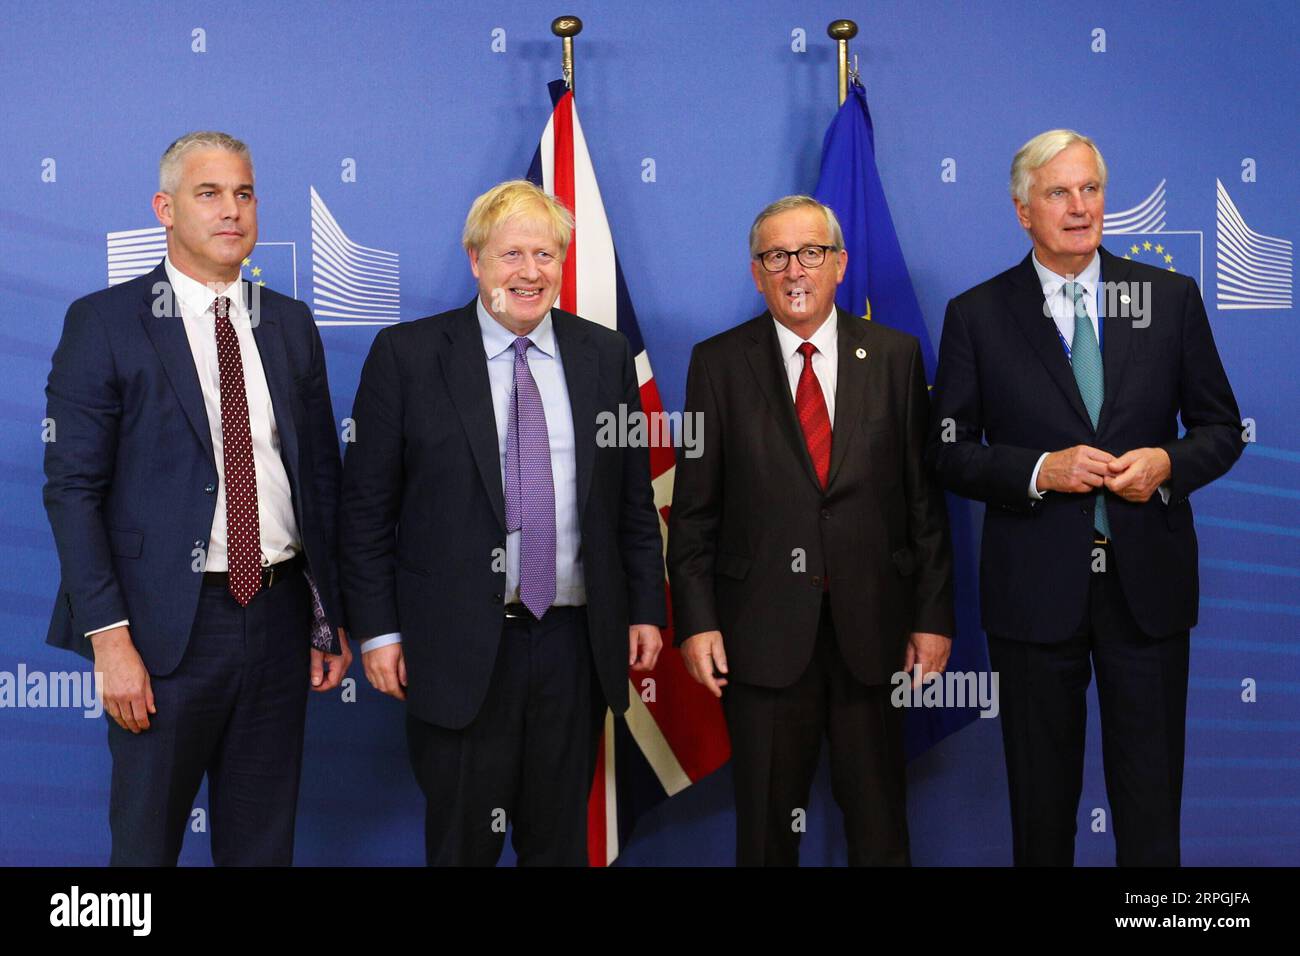 191017 -- BRUSSELS, Oct. 17, 2019 -- British Prime Minister Boris Johnson 2nd L, British Brexit Secretary Stephen Barclay 1st L, President of the European Commission Jean-Claude Juncker 2nd R and the EU s chief Brexit negotiator Michel Barnier pose for photos after meeting the press at the European Commission headquarters in Brussels, Belgium, Oct. 17, 2019. The European Union and Britain have reached a new Brexit deal, Jean-Claude Juncker said Thursday on his twitter account.  BELGIUM-BRUSSELS-EU-BREXIT-PRESS CONFERENCE ZhengxHuansong PUBLICATIONxNOTxINxCHN Stock Photo